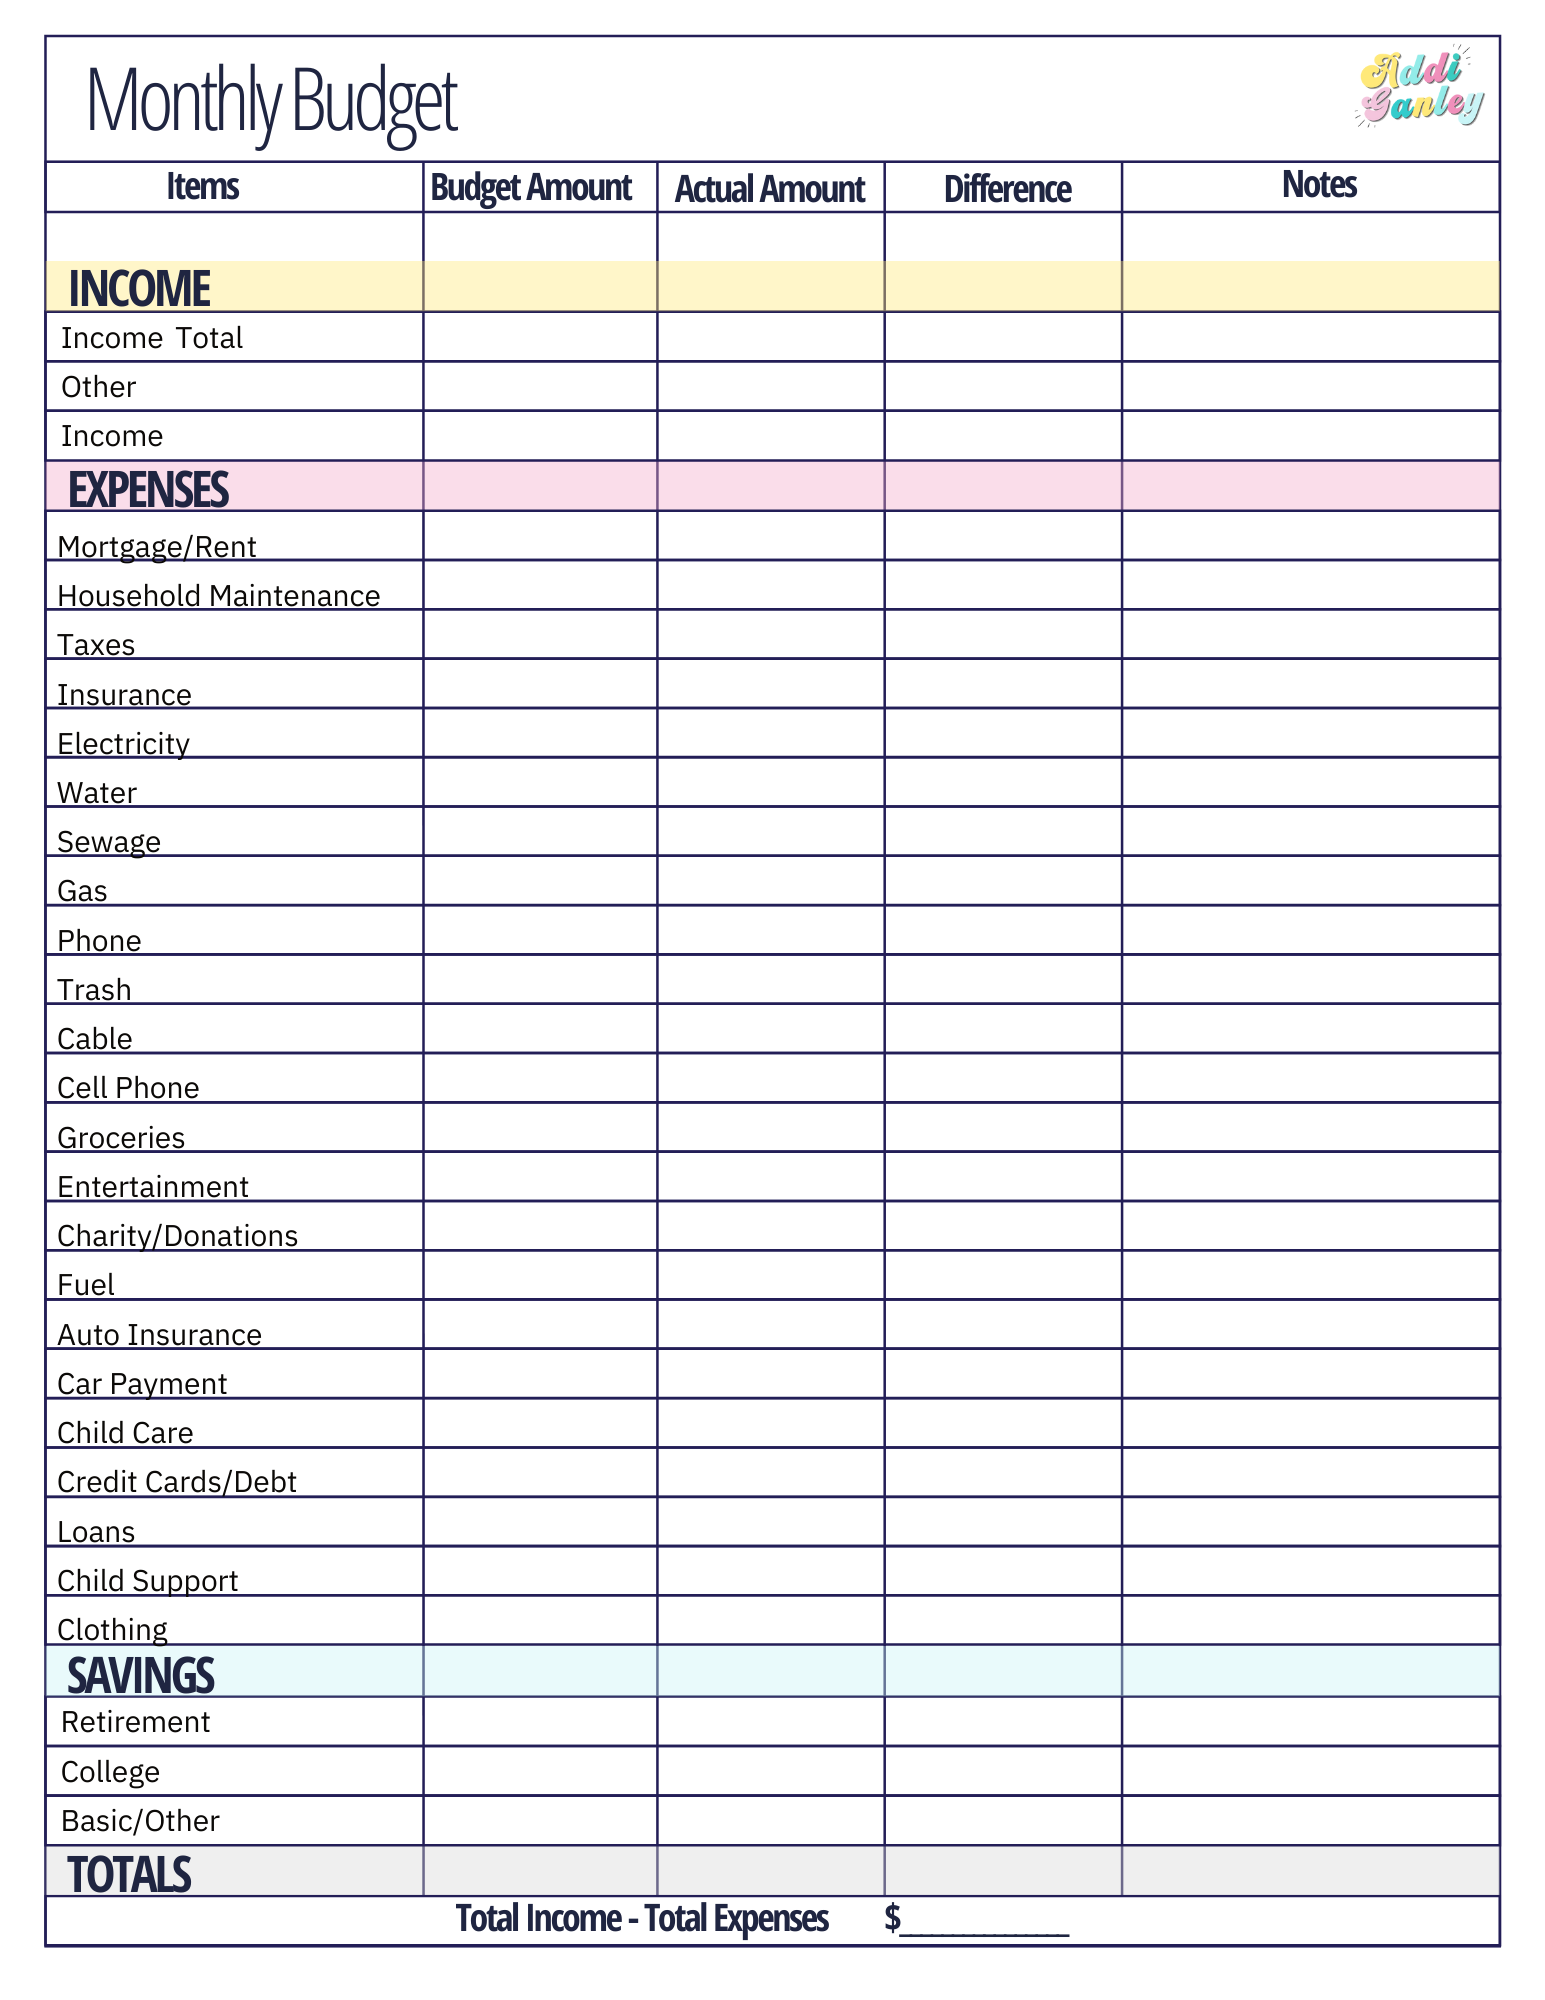 Free Monthly Budget Template - Instant Download inside Free Printable Household Expense Sheets